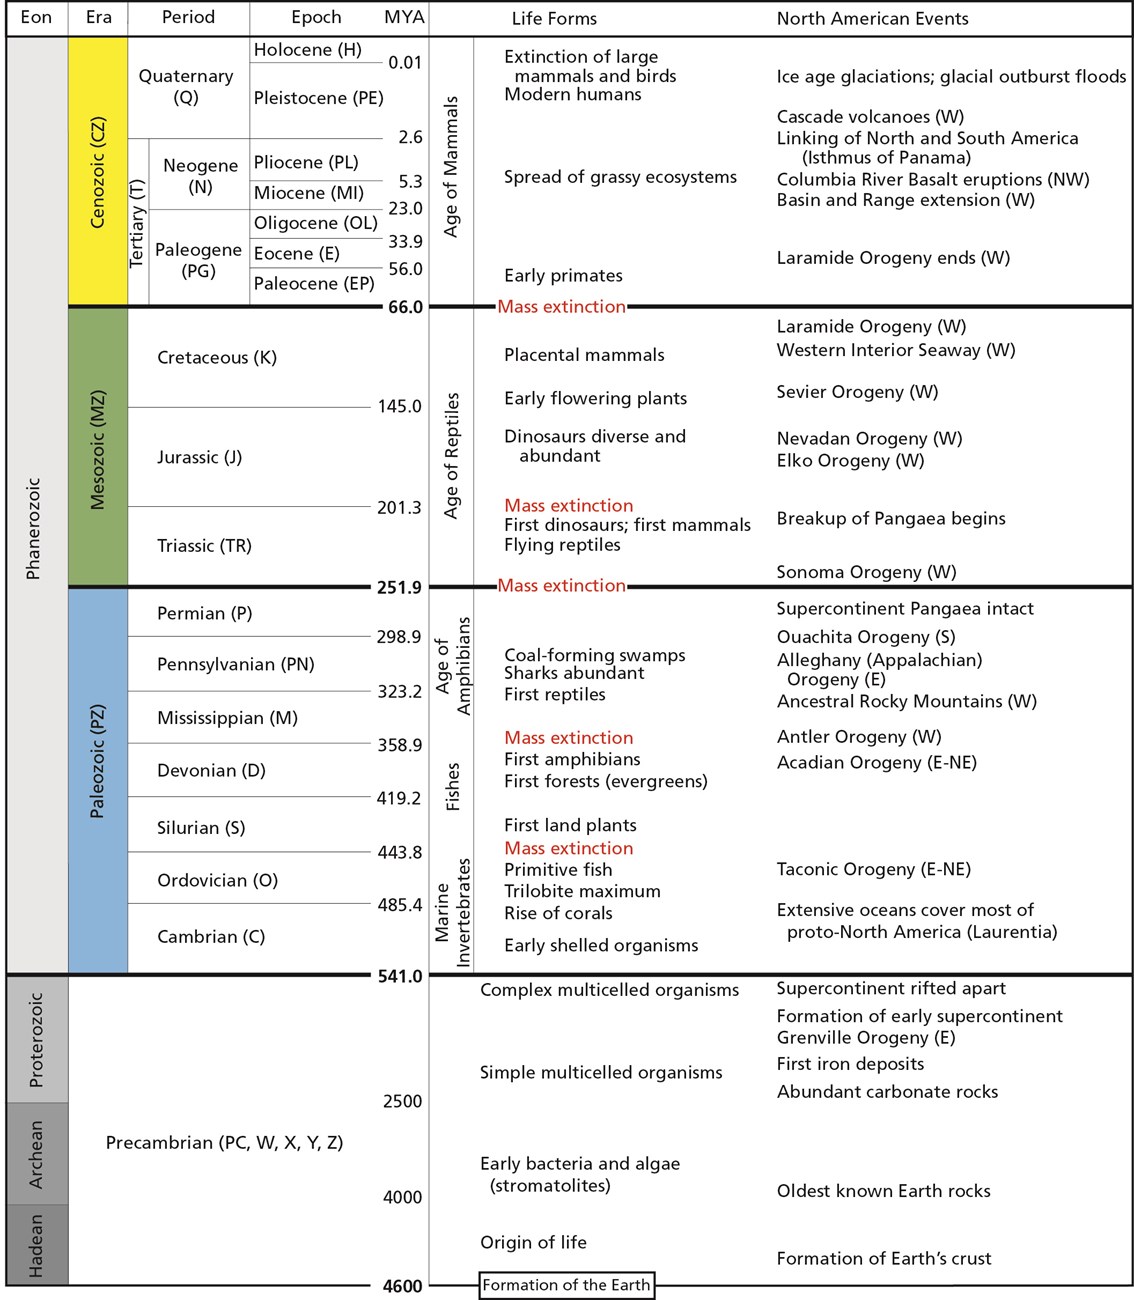 Table of geological time scale and examples. Full text link in caption.